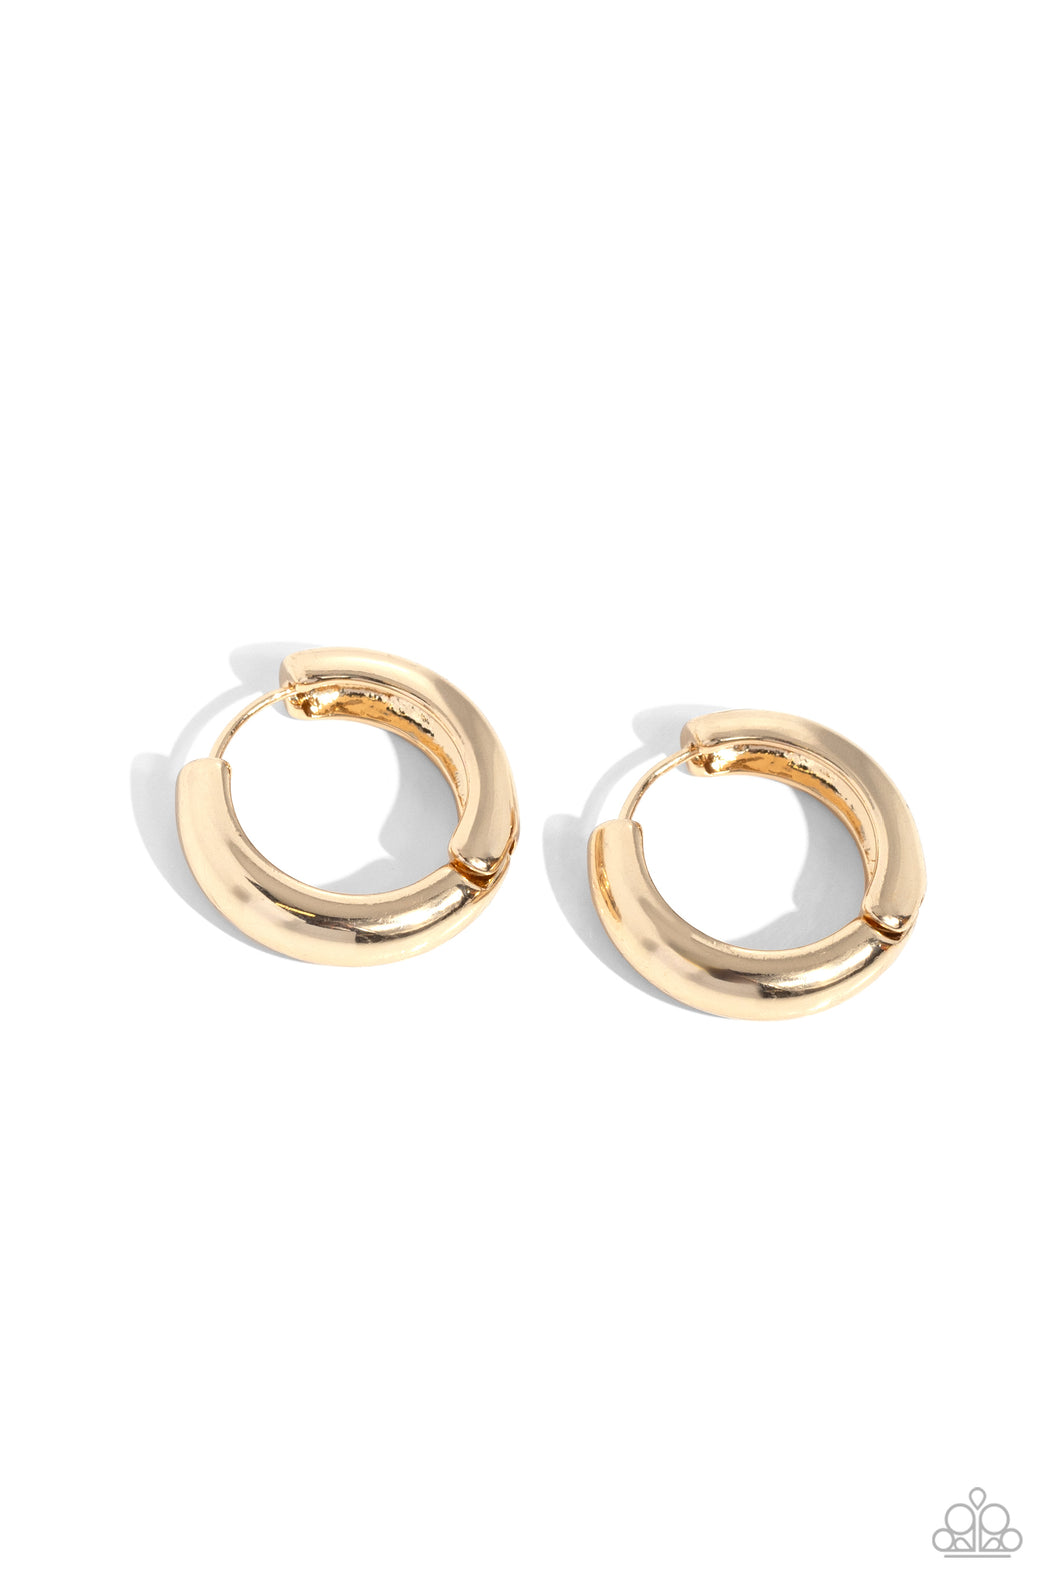 Paparazzi Earrings Simply Sinuous - Gold Coming Soon